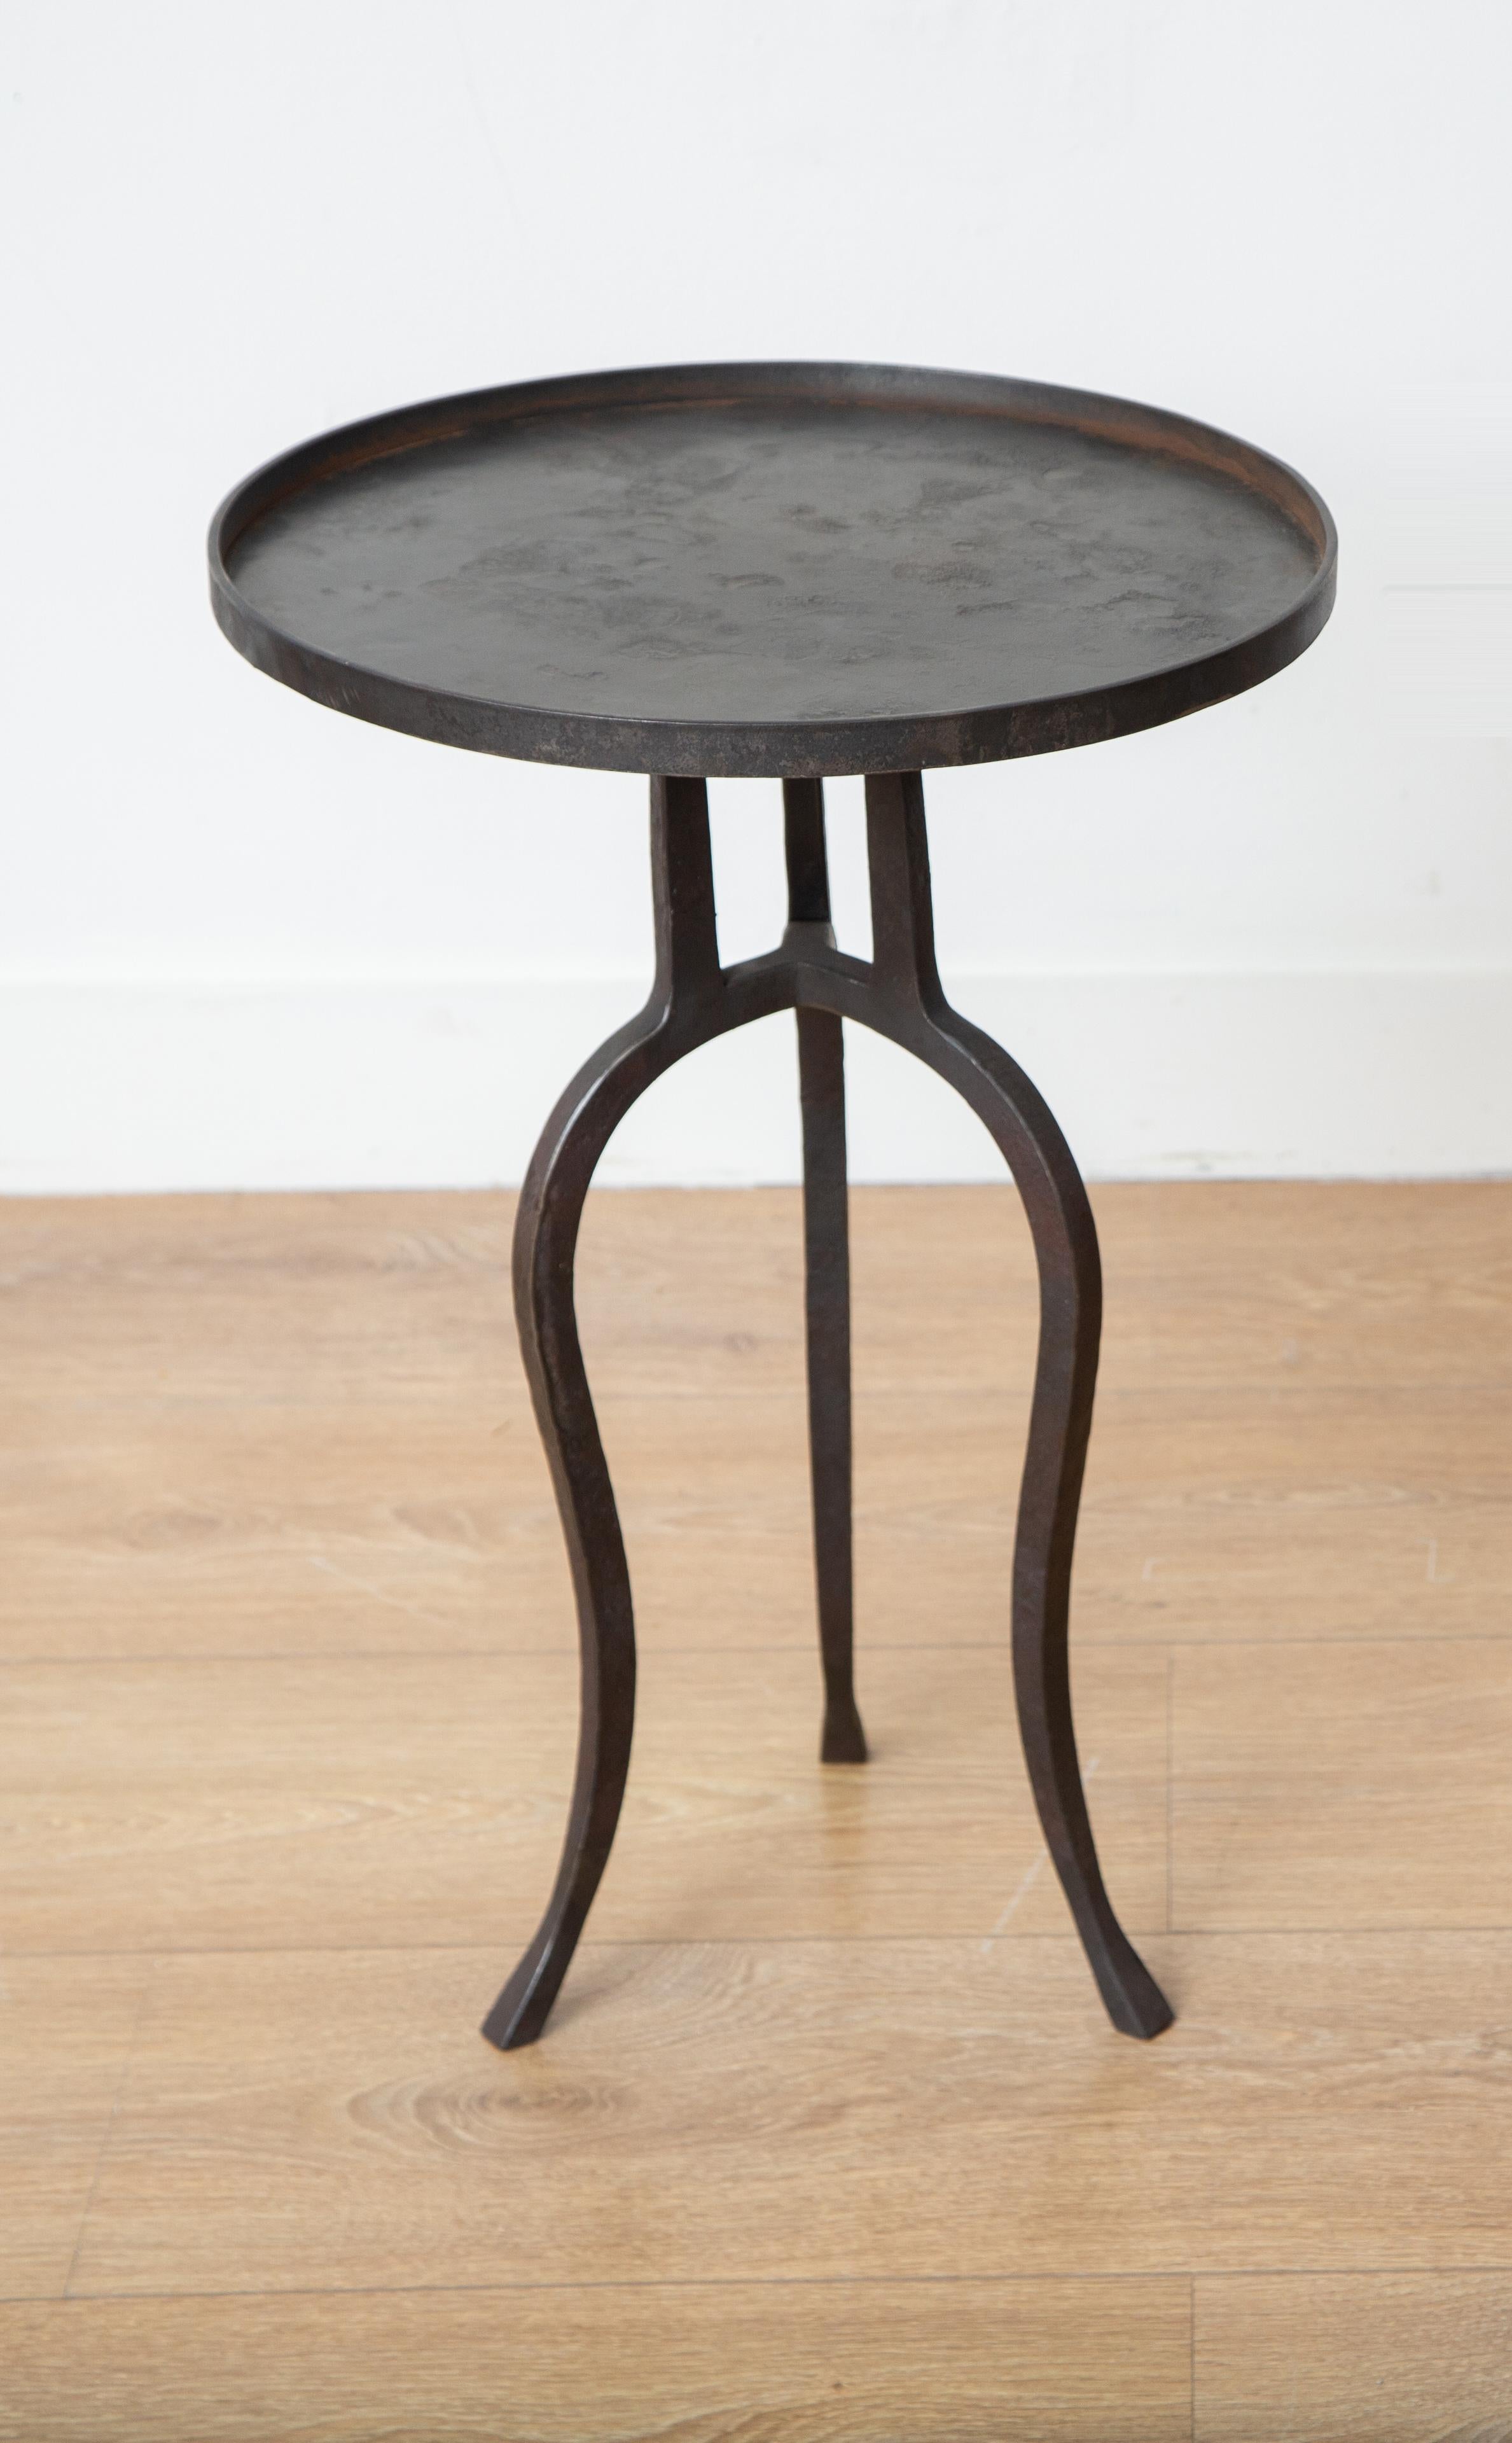 Small black iron side or drinks table, in stock.
This stunning wrought iron tripod side table is an eye-catching addition to any home decor. Its round top features a lip, and its hammered metal frame has a beautiful black patina that gives it a